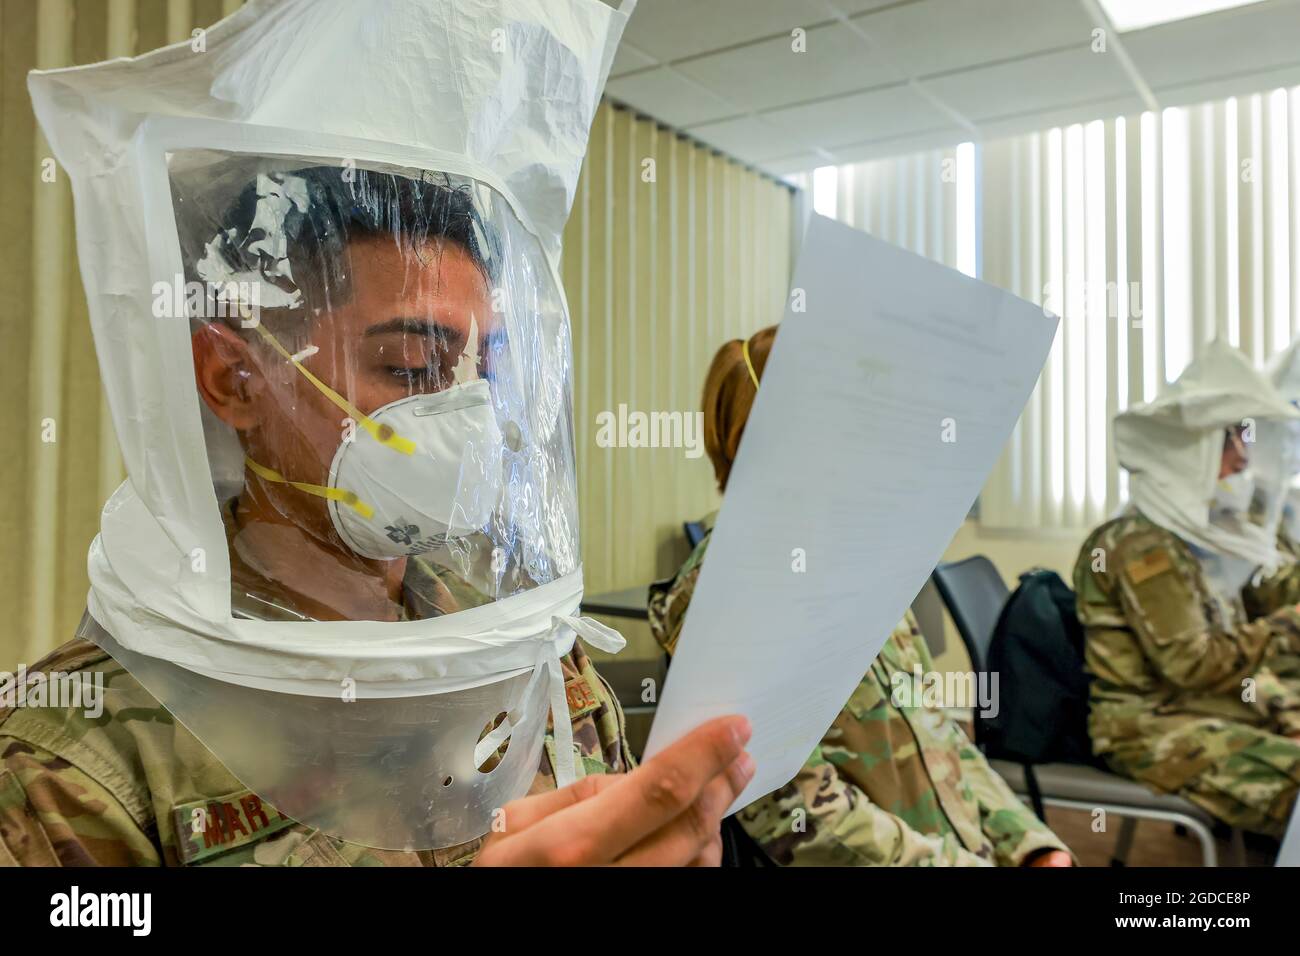 An U.S. Air Force medical provider participates in an N95 mask fit test at the Lodi Memorial Hospital located in Lodi, California, Dec. 29, 2020. Department of Defense medical teams prepare to integrate into California hospitals to provide medical support alongside hospital medical personnel in response to the COVID-19 pandemic. U.S. Northern Command, through U.S. Army North, remains committed to providing flexible U.S. Department of Defense support to the whole-of-America COVID-19 response. (U.S. Army photo by Spc. DeAndre Pierce) Stock Photo